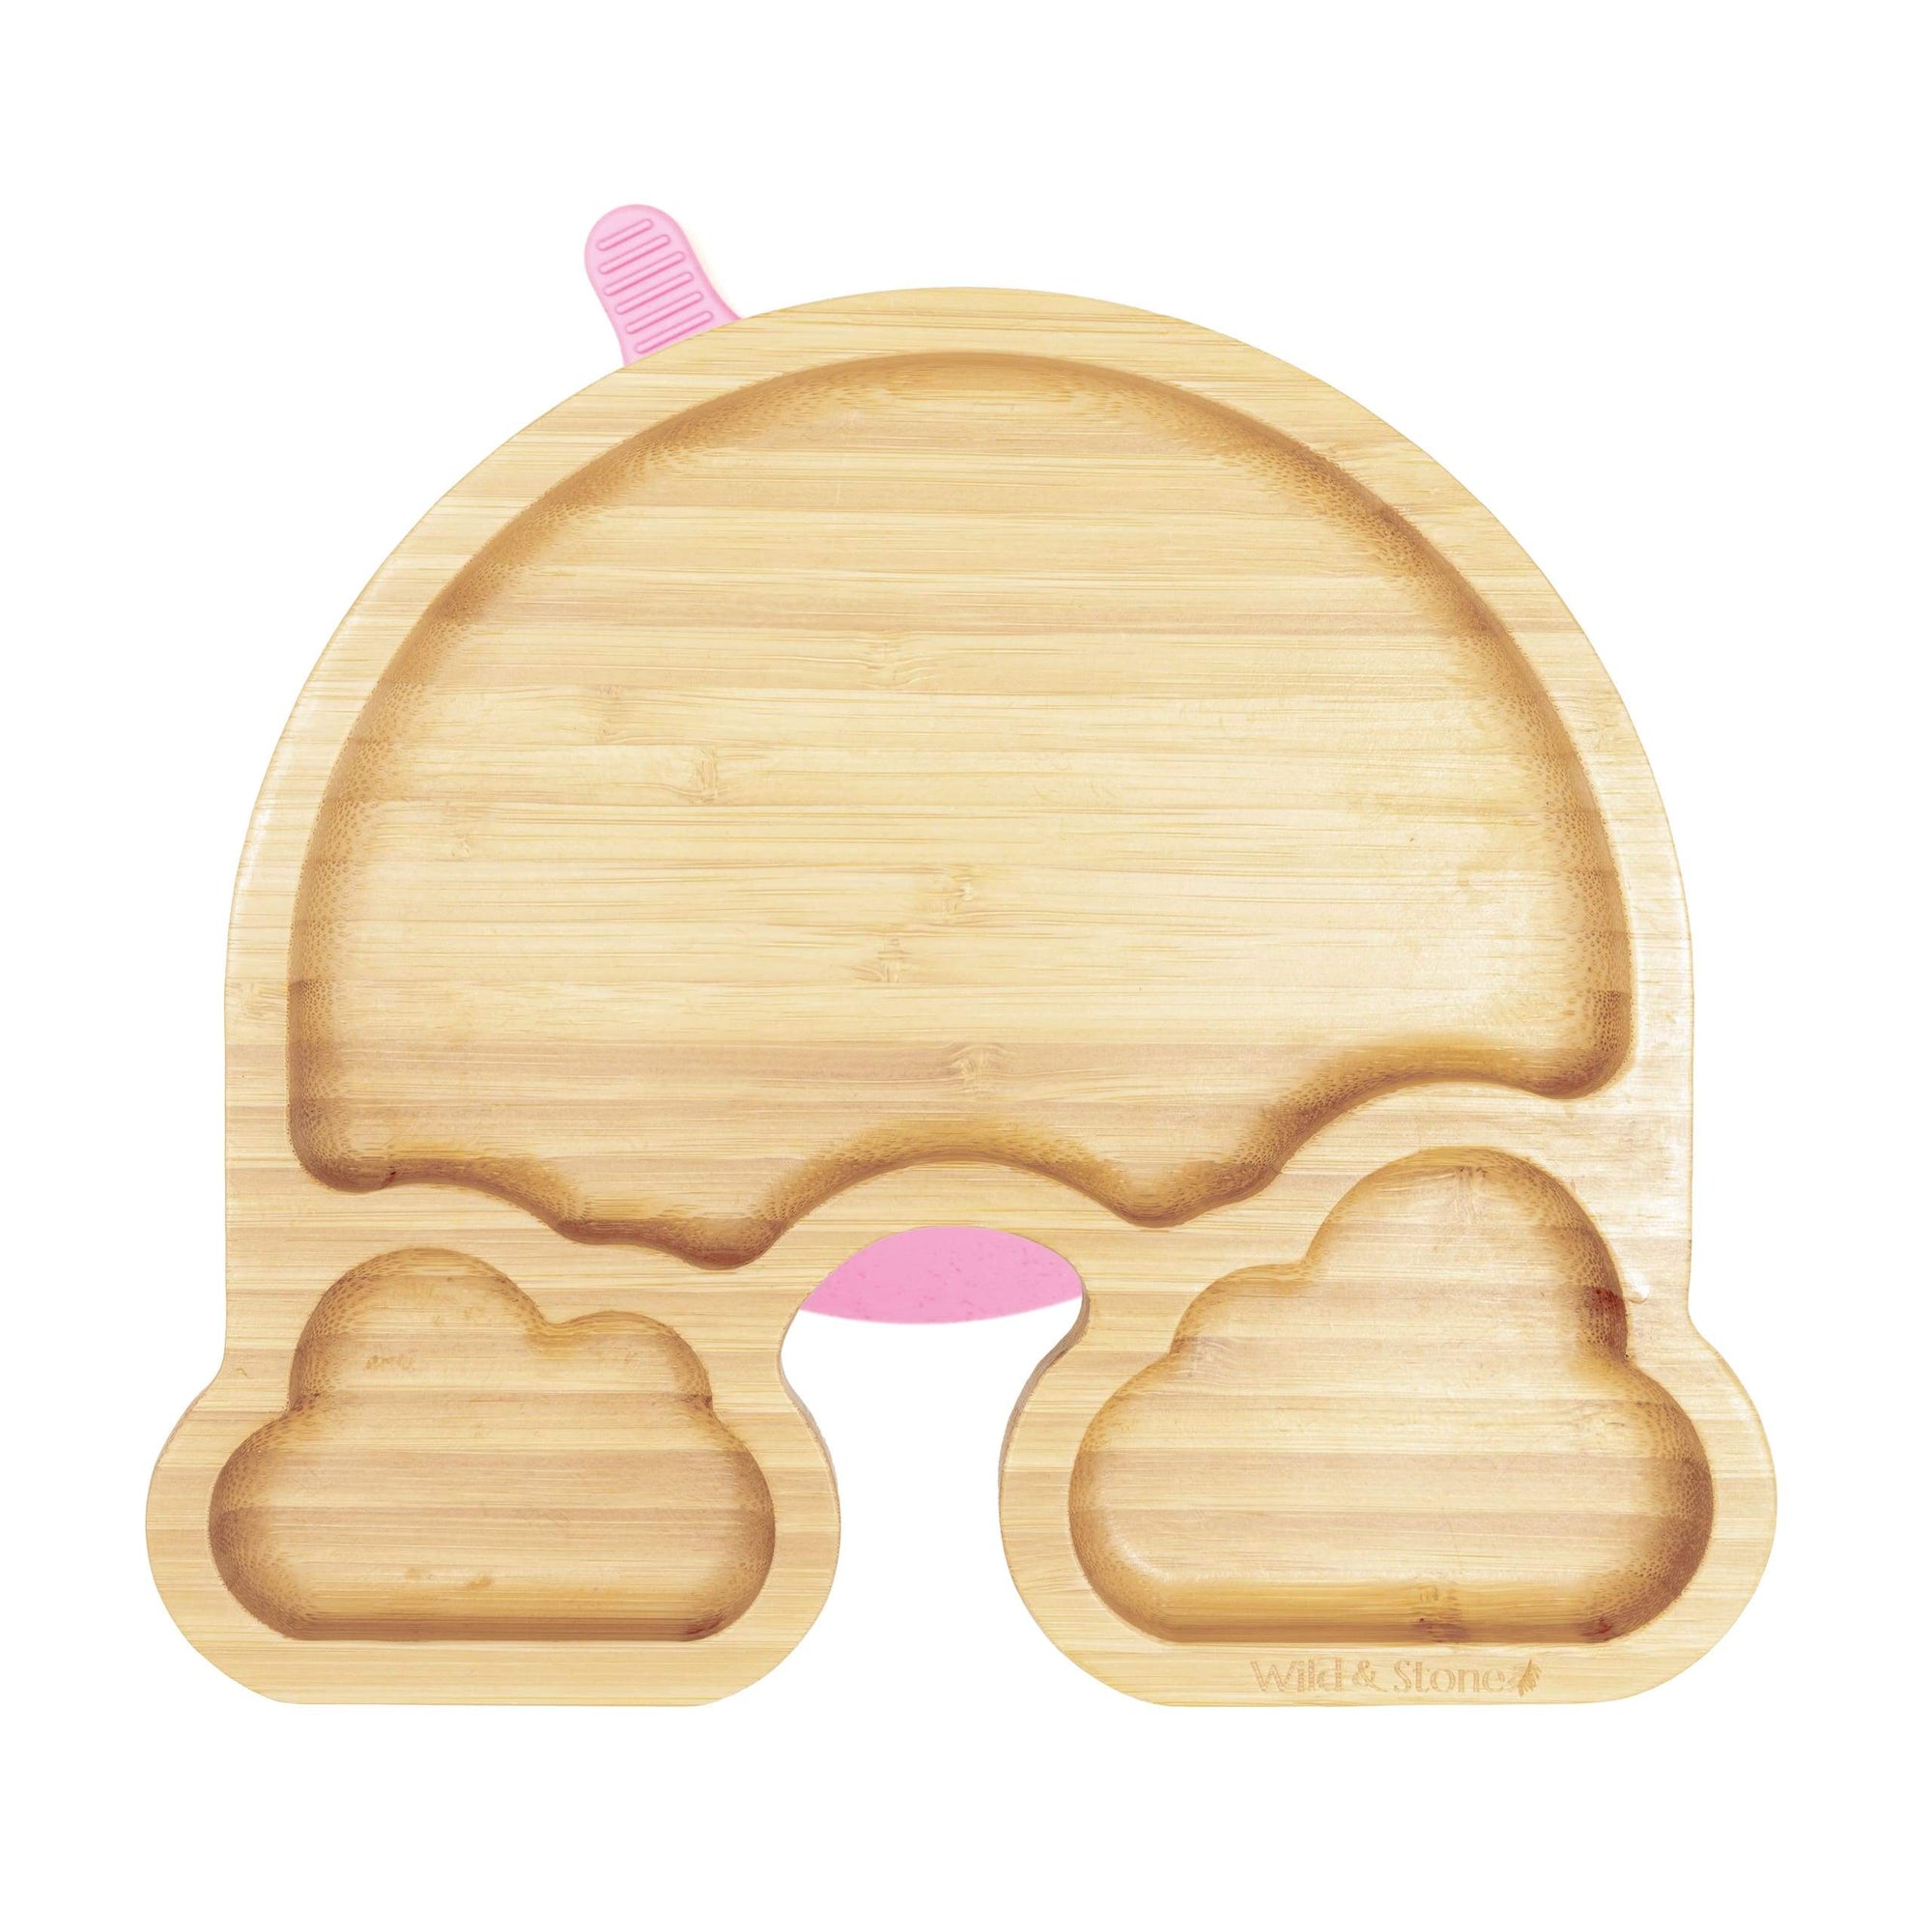 Baby Bamboo Weaning Plate Set - Over The Rainbow